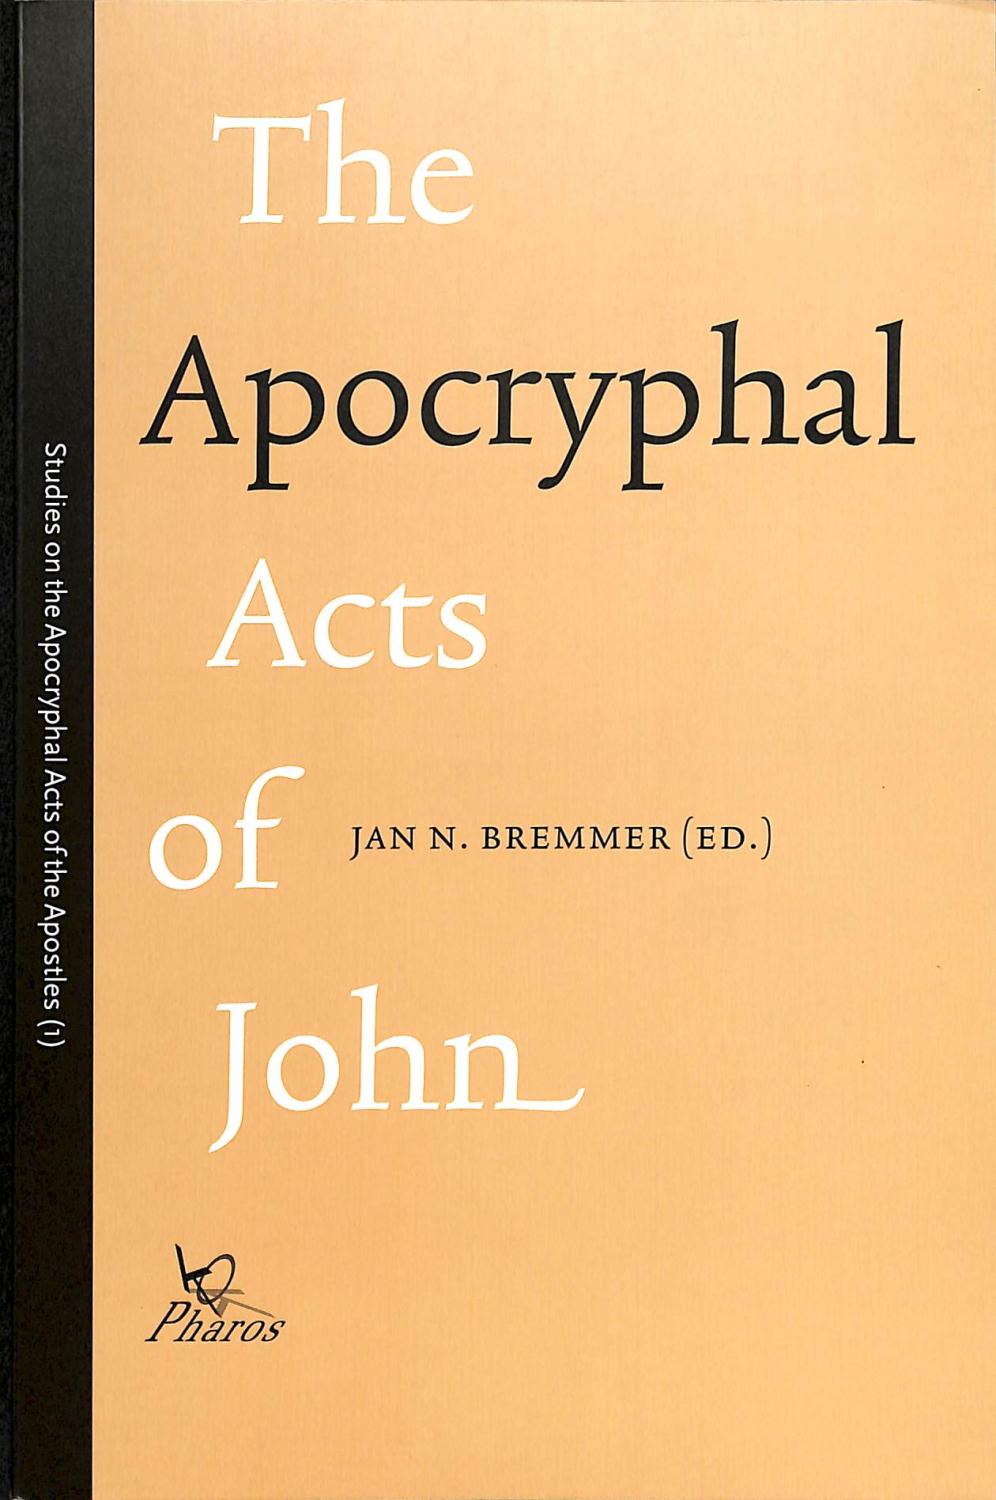 The Apocryphal Acts of John (Studies on Early Christian Apocrypha)